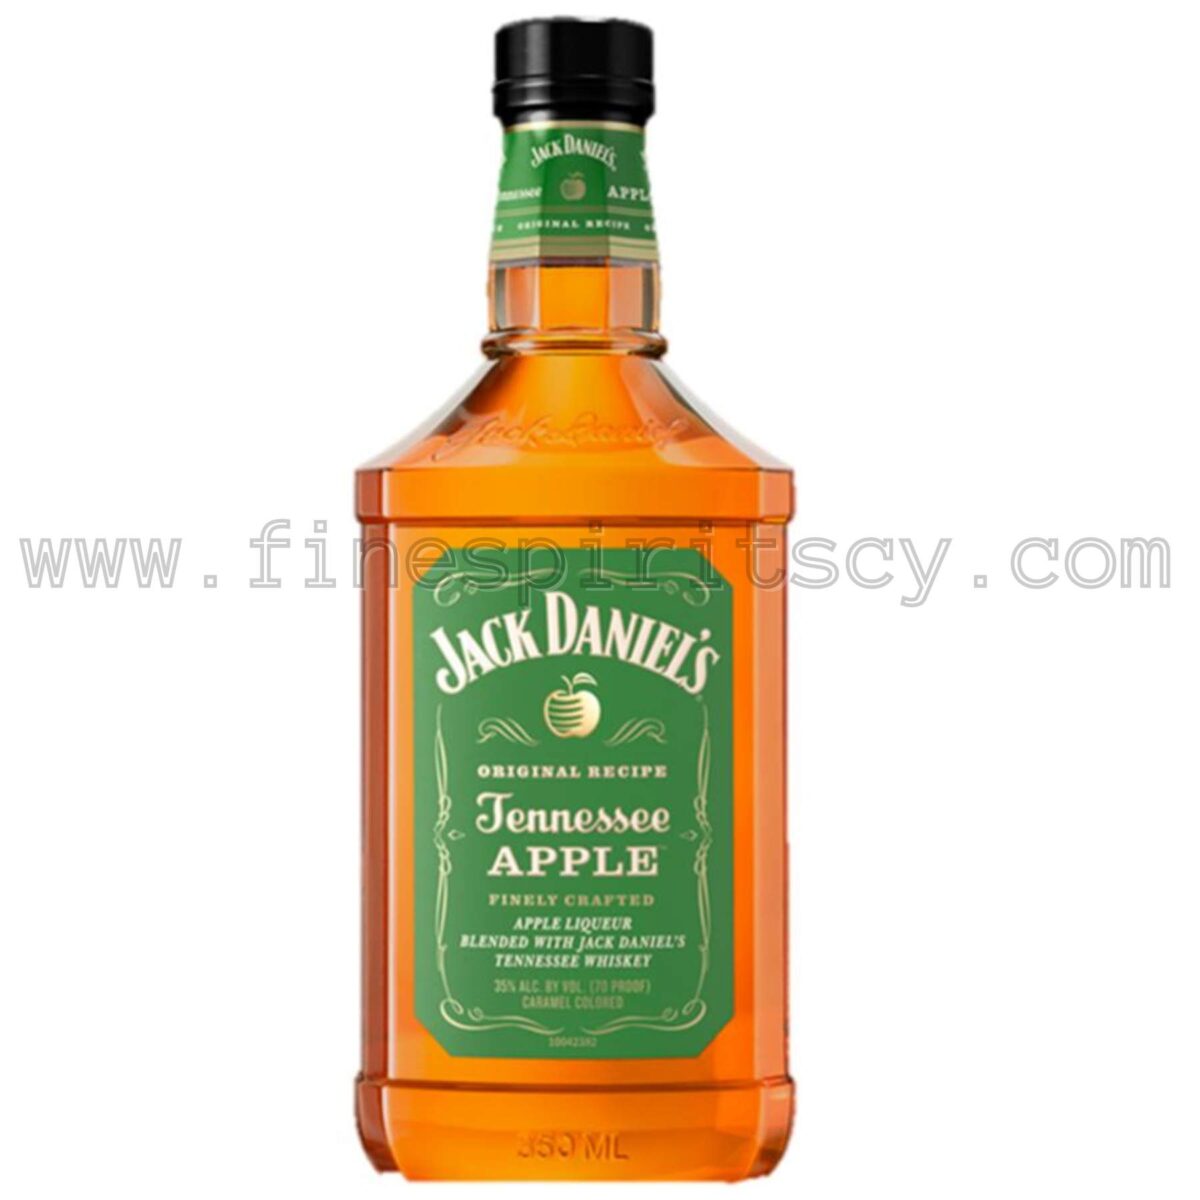 Whisky Online Cyprus - Jack Daniels Mailbox Gift 70cl, 40%